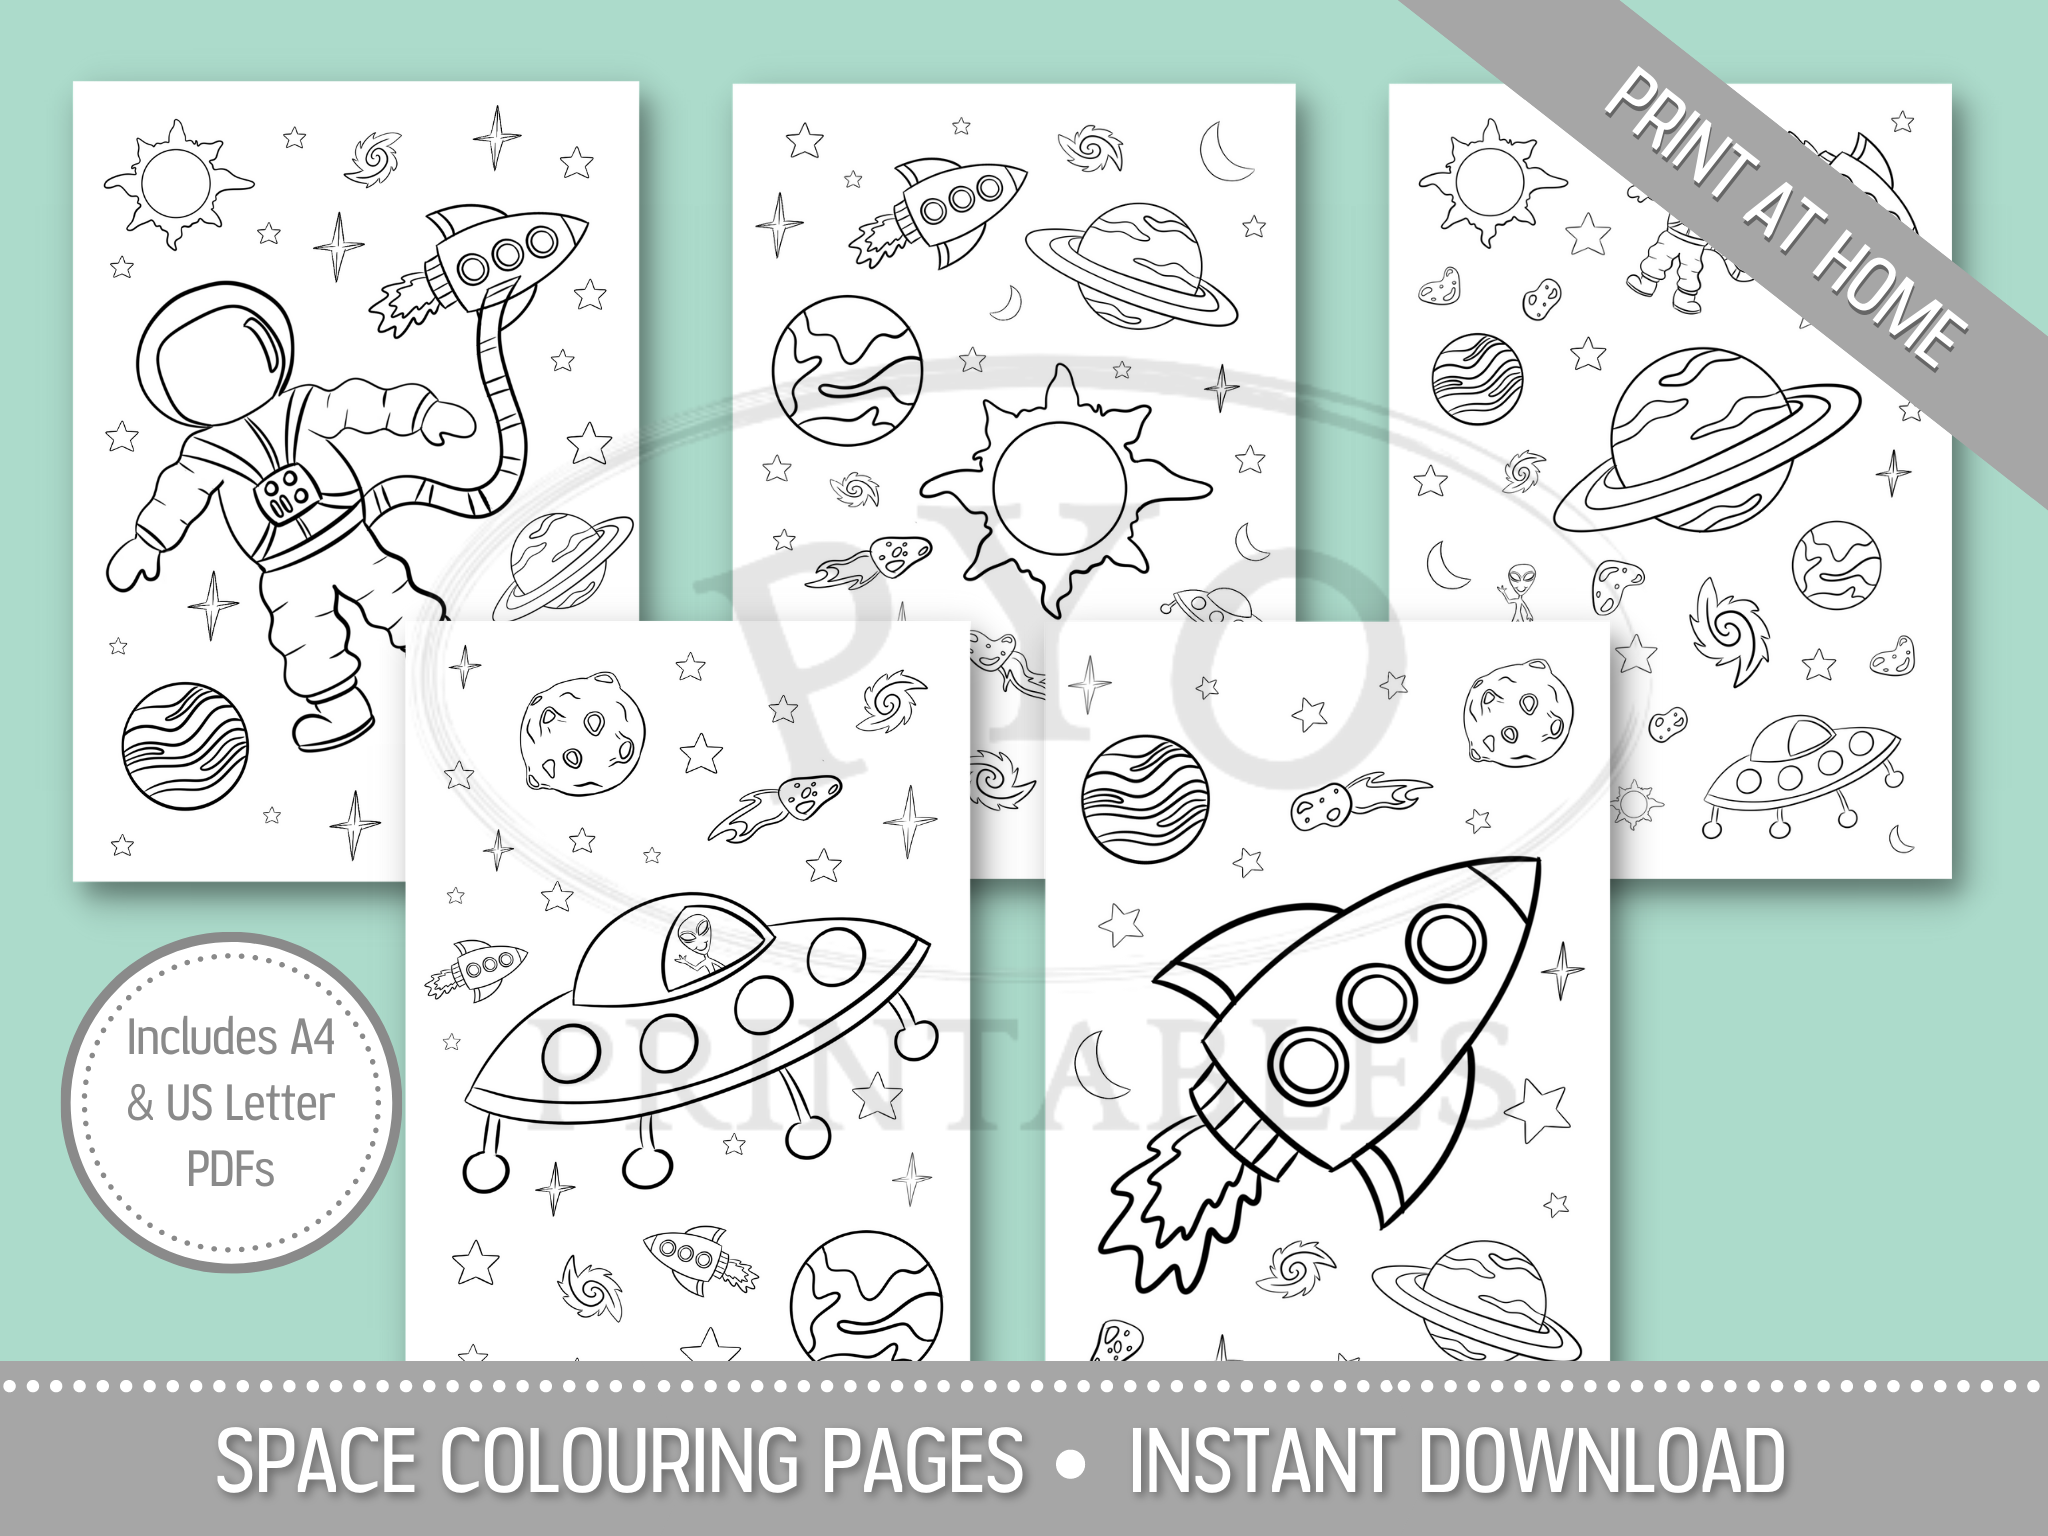 Printable space colouring pages